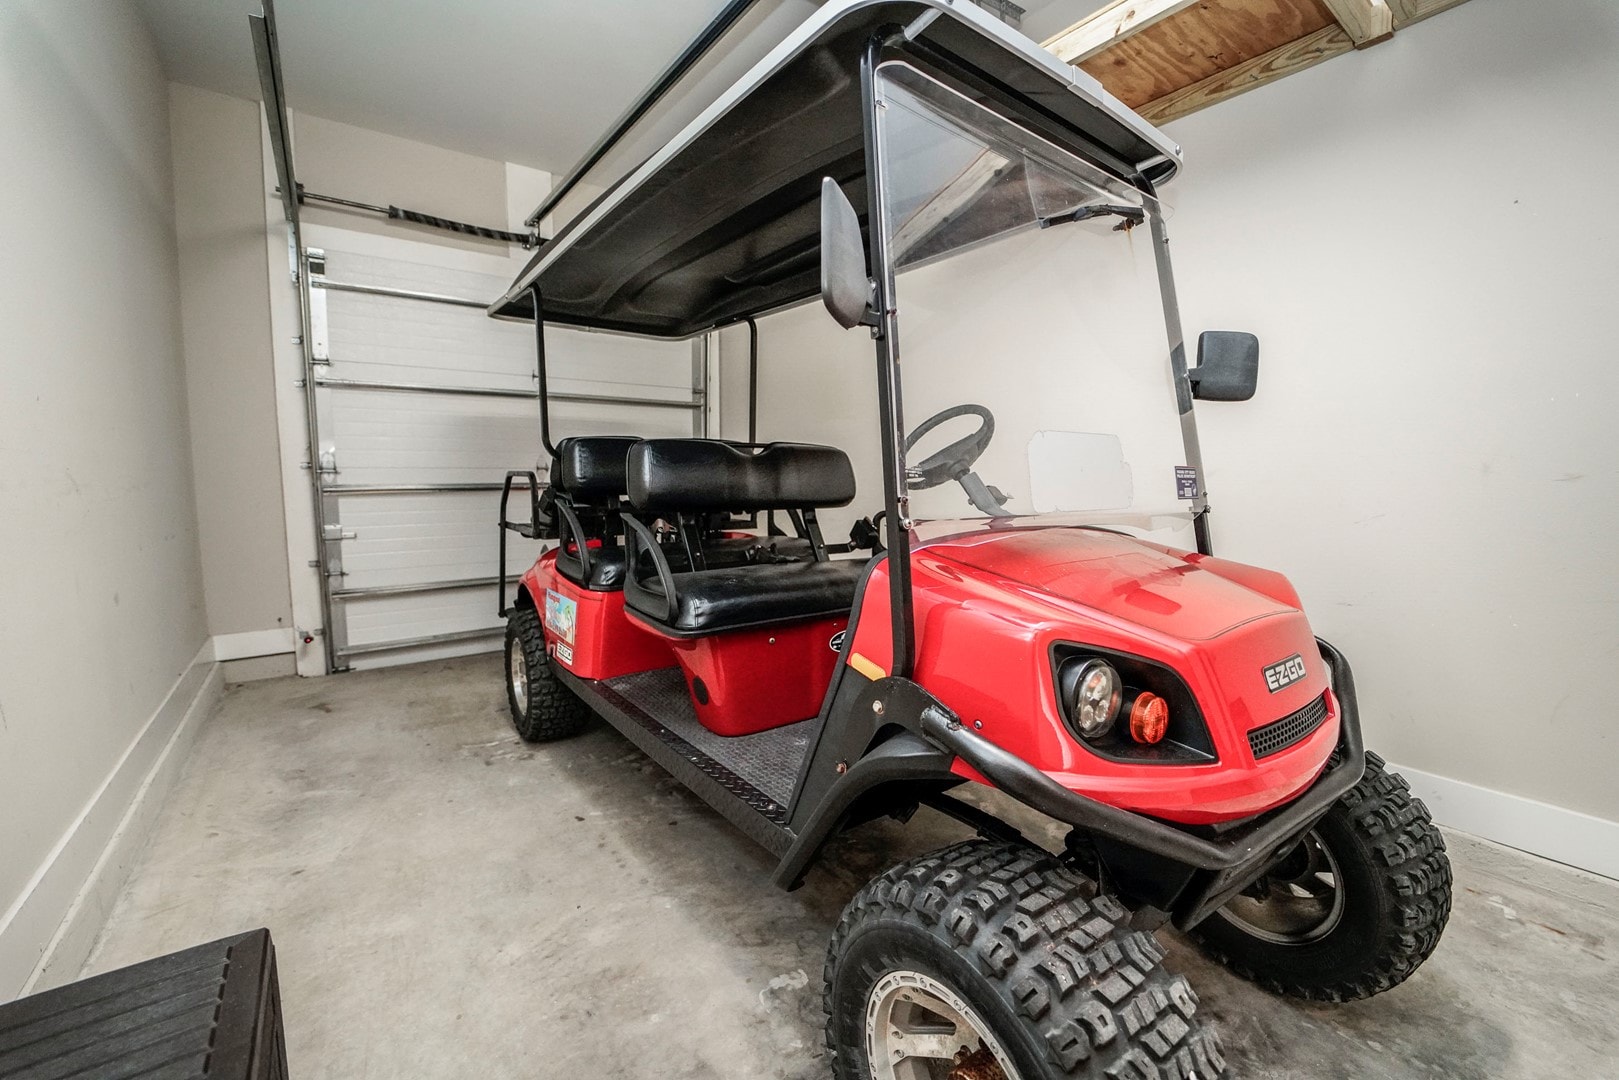 Golf Cart Included with Your Rental! WOOHOO!